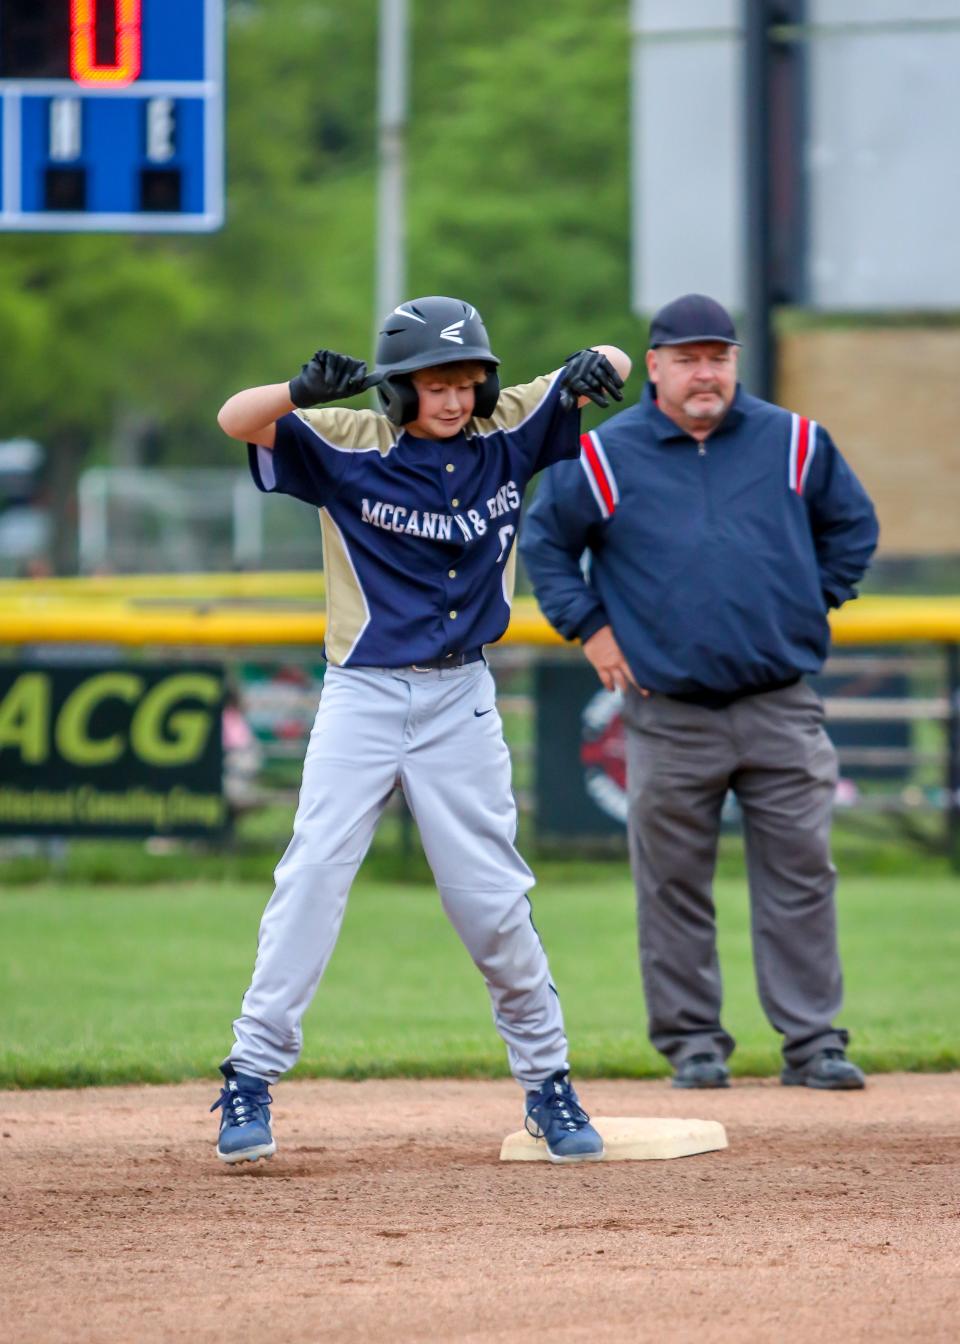 Cayson Stupalski of McCann & Son's reacts after reaching second base in recent action at Whaling City Youth Baseball.